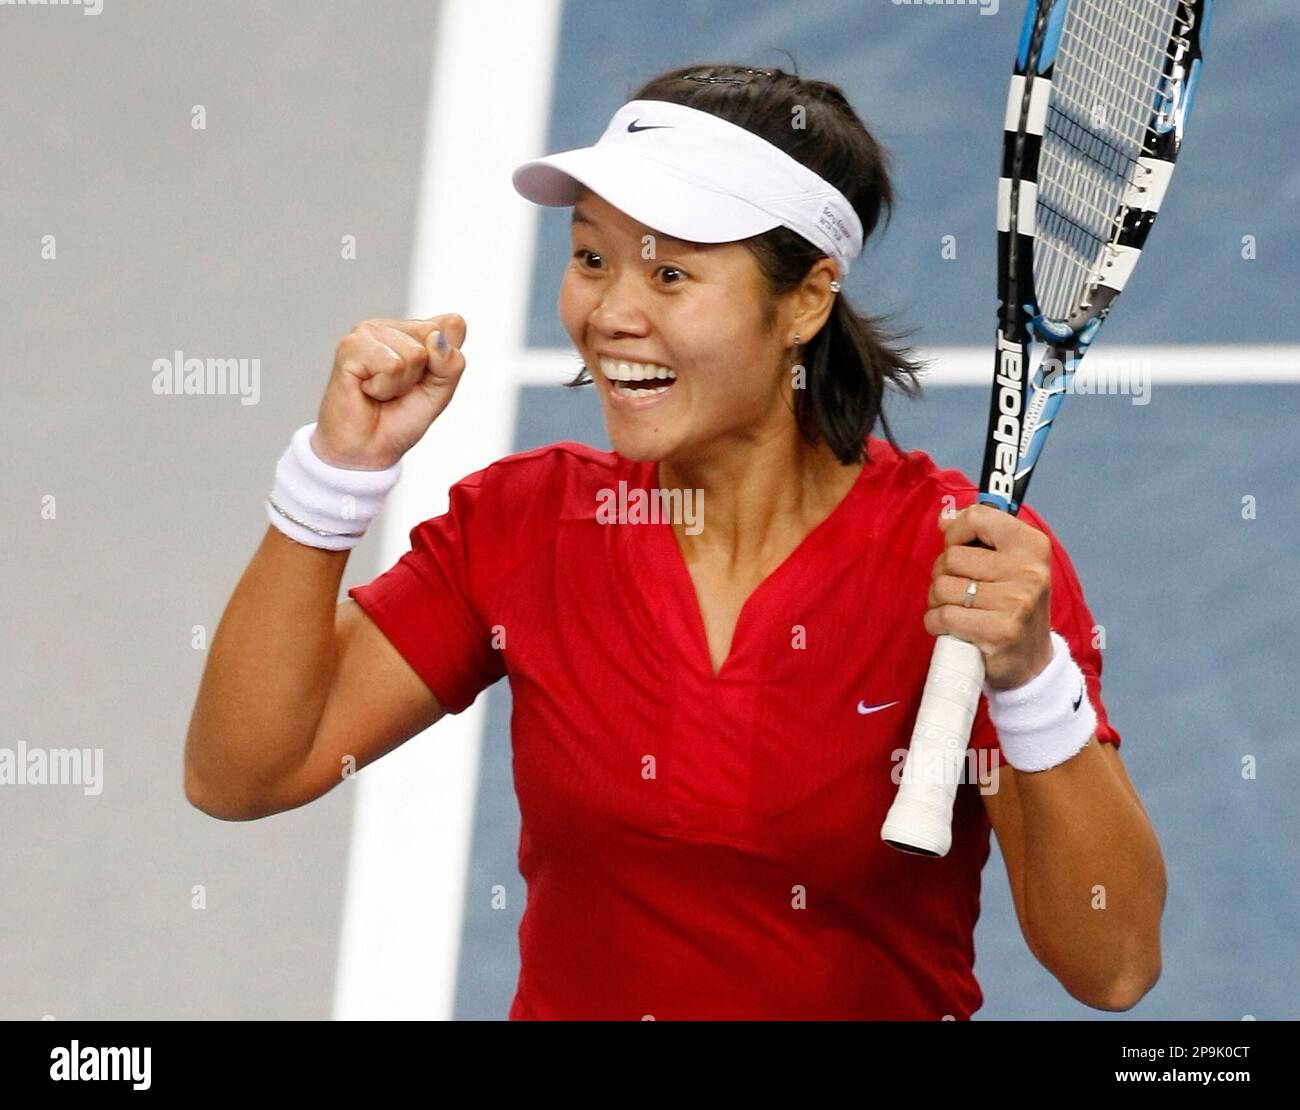 Na Li from China reacts after defeating Serena Williams from the USA during their 2nd round match at the Porsche Grand Prix tennis tournament in Stuttgart, Germany, Wednesday, Oct